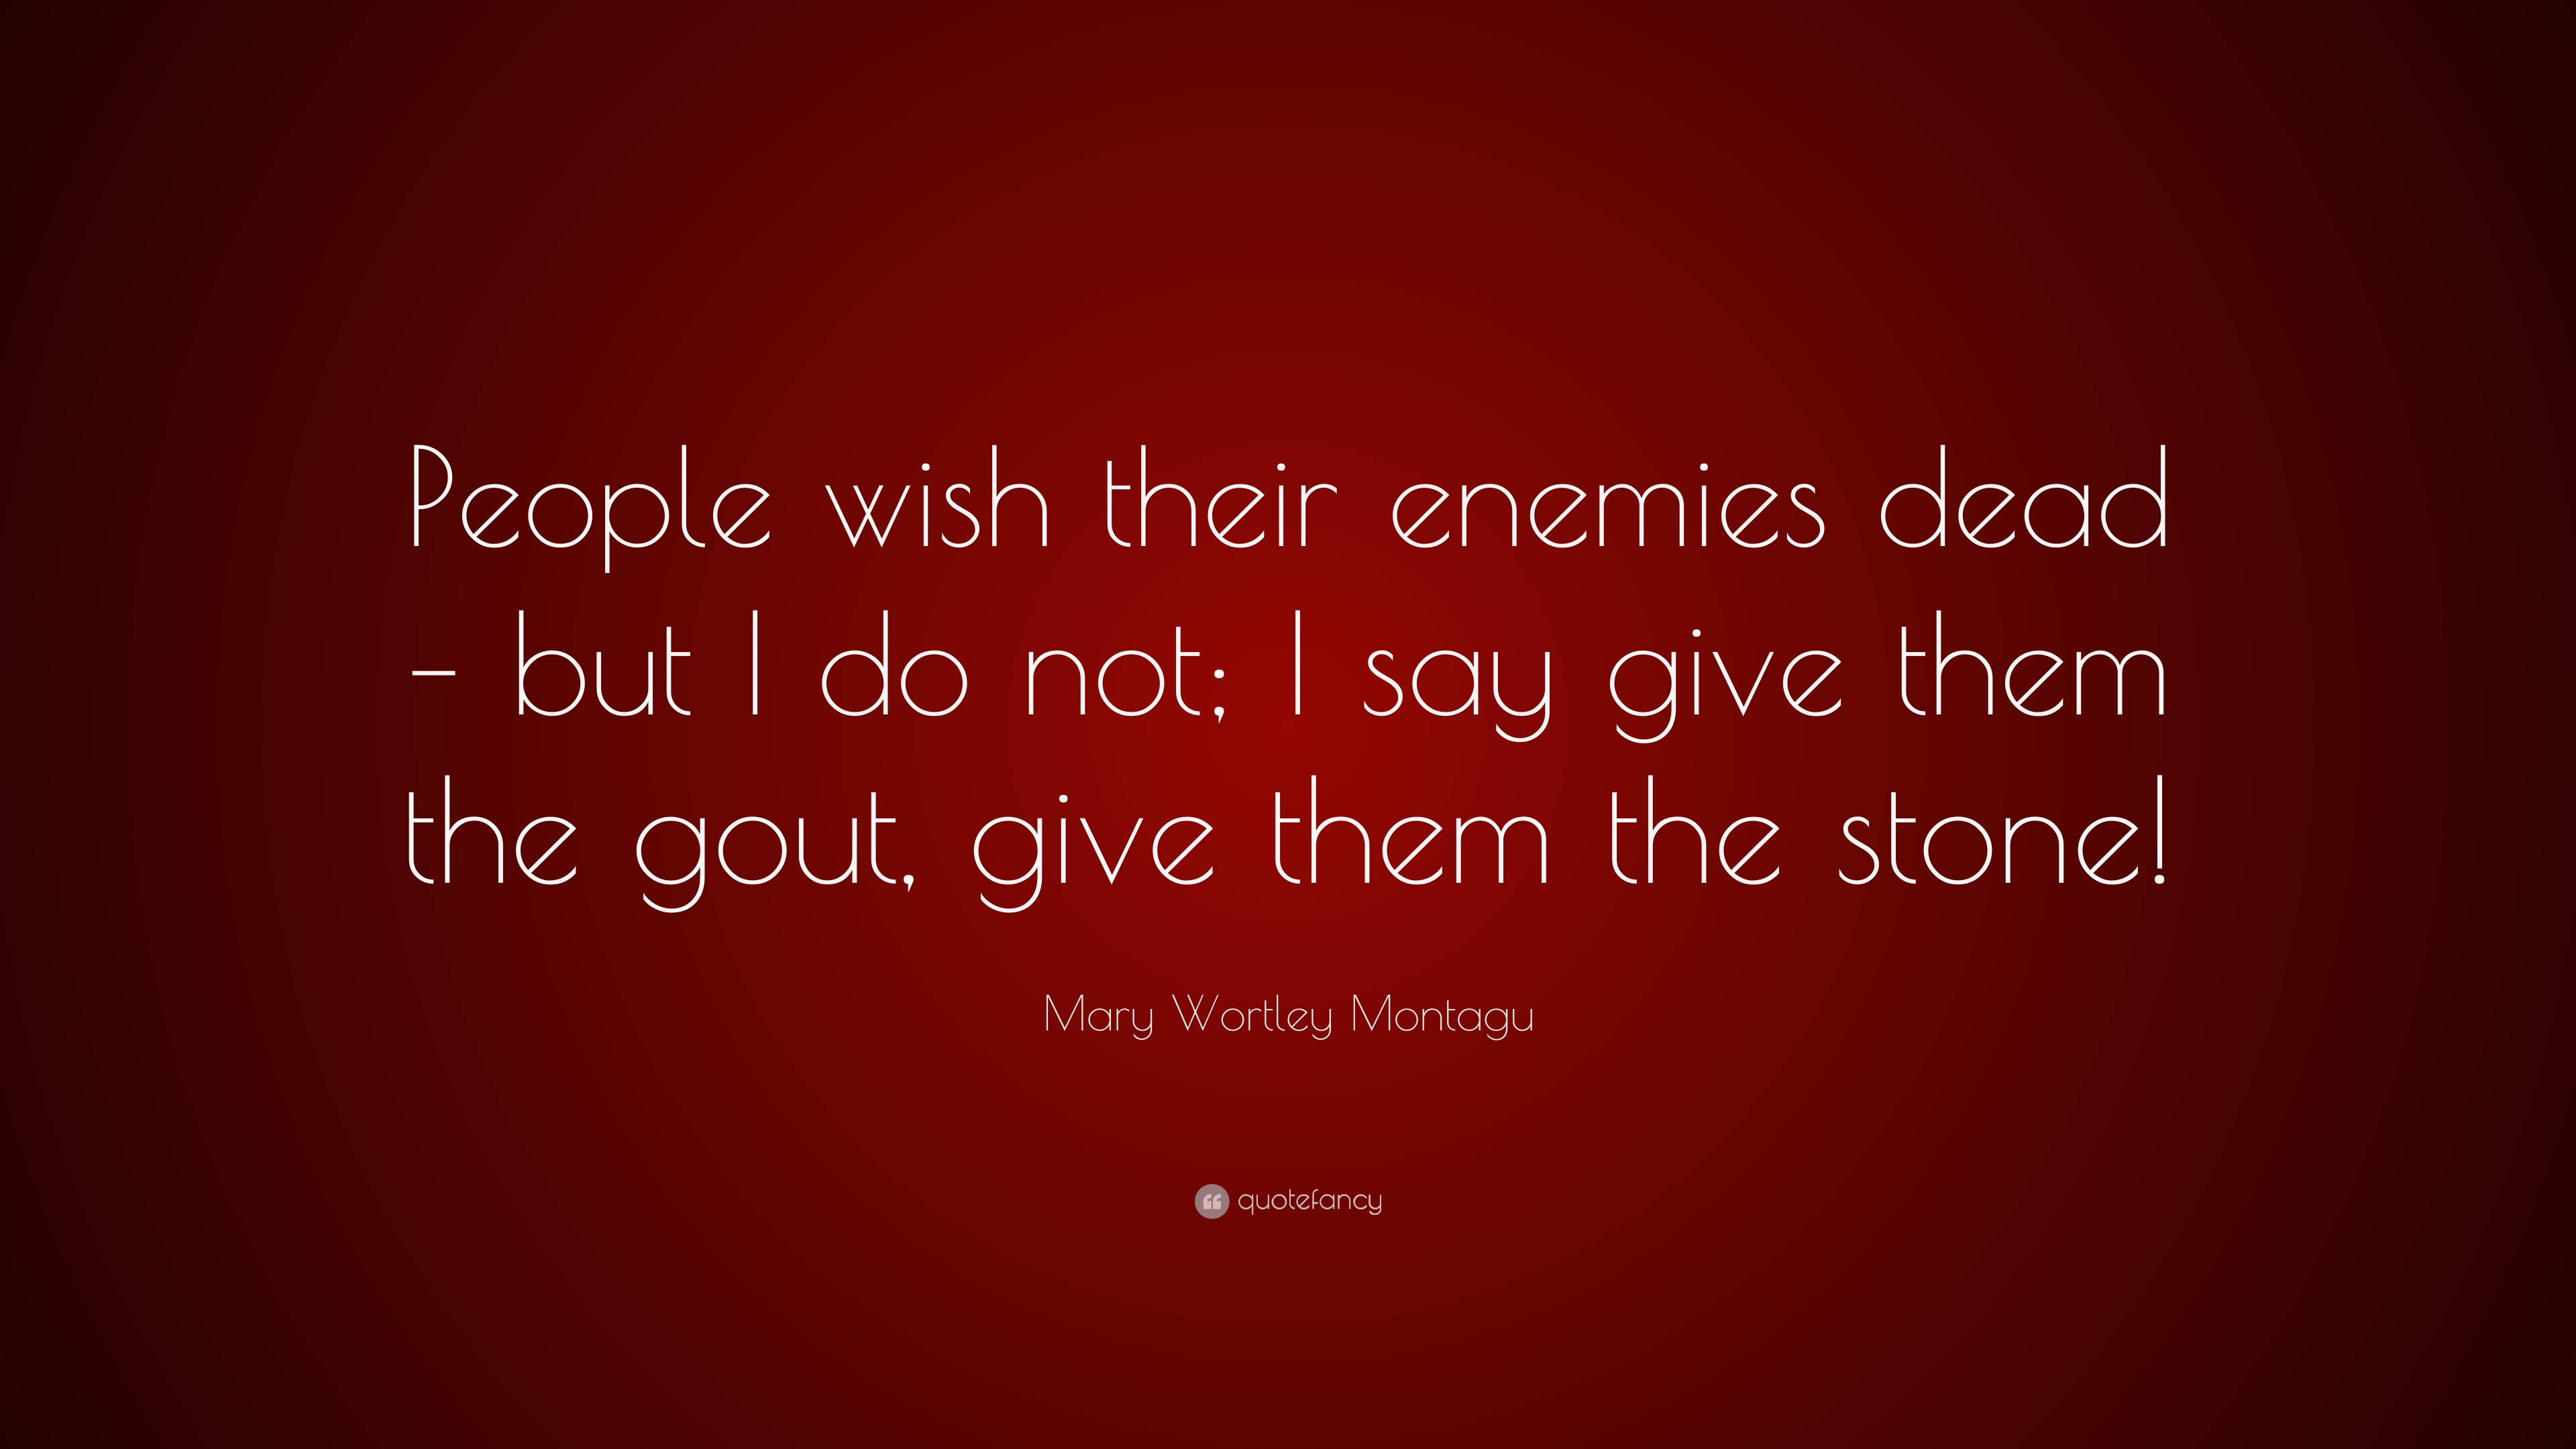 Mary Wortley Montagu Quote: “People Wish Their Enemies Dead – But I Do Not; I Say Give